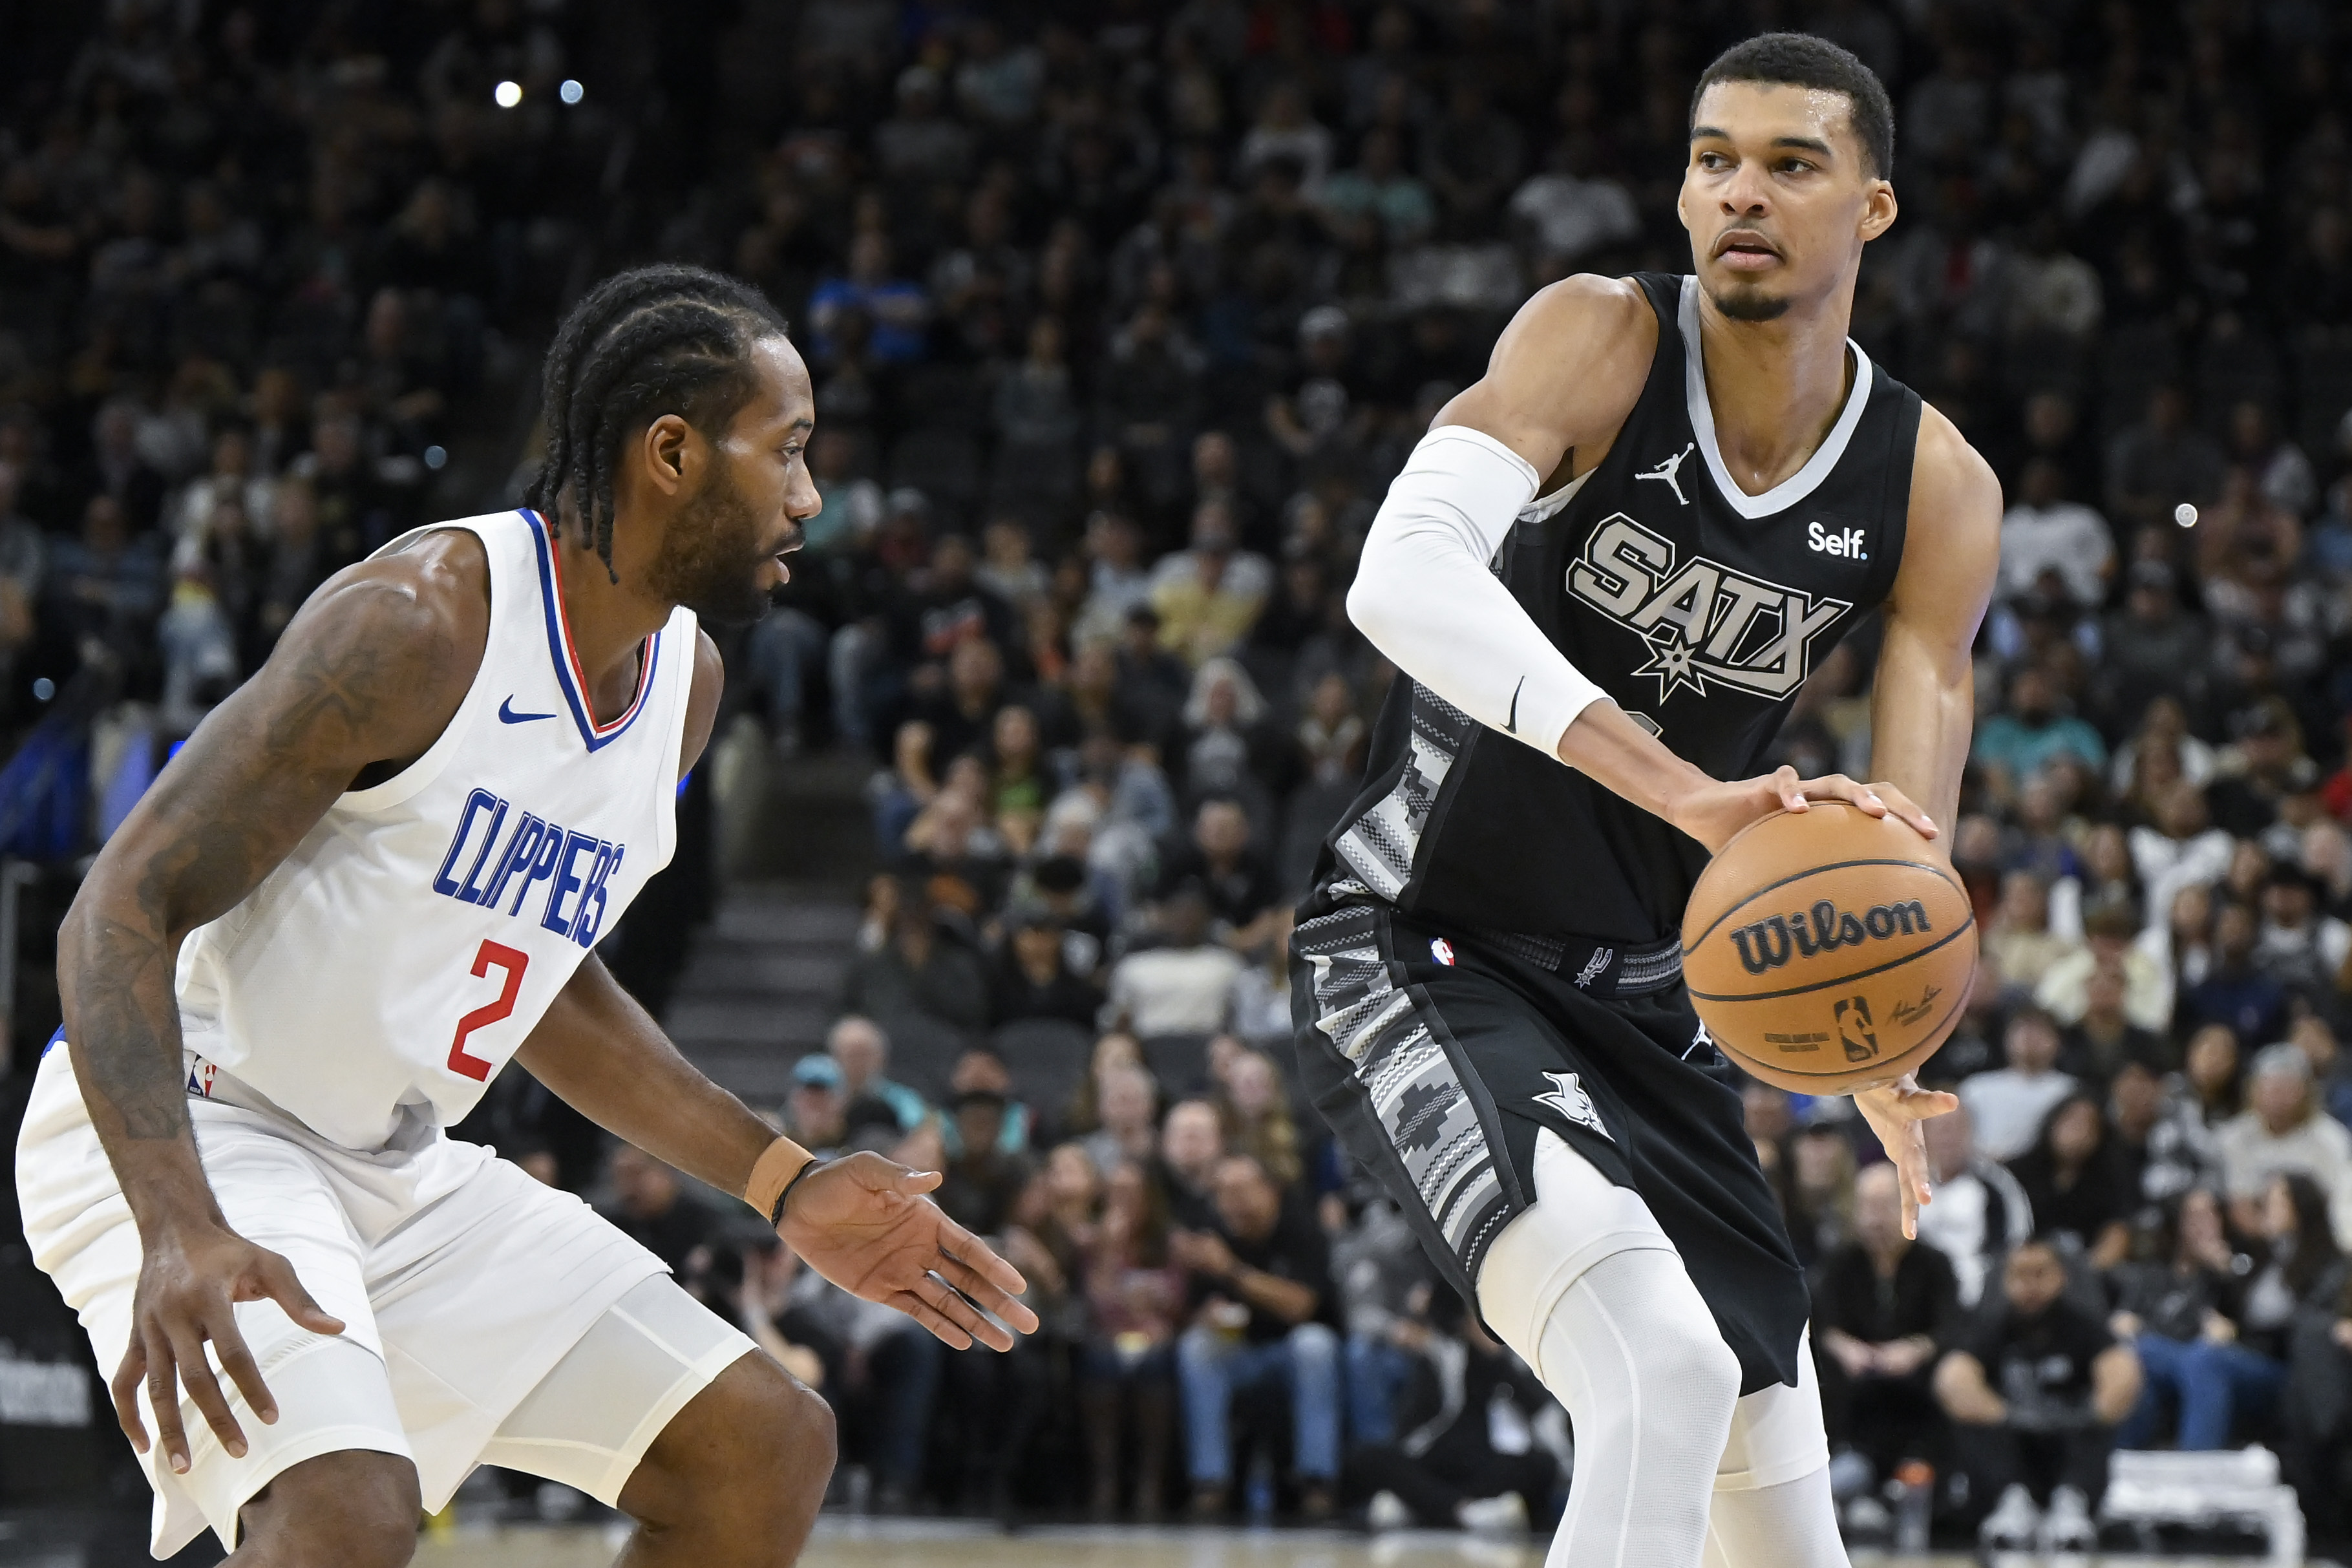 Kawhi Leonard leads Clippers past Spurs amid boos that prompt